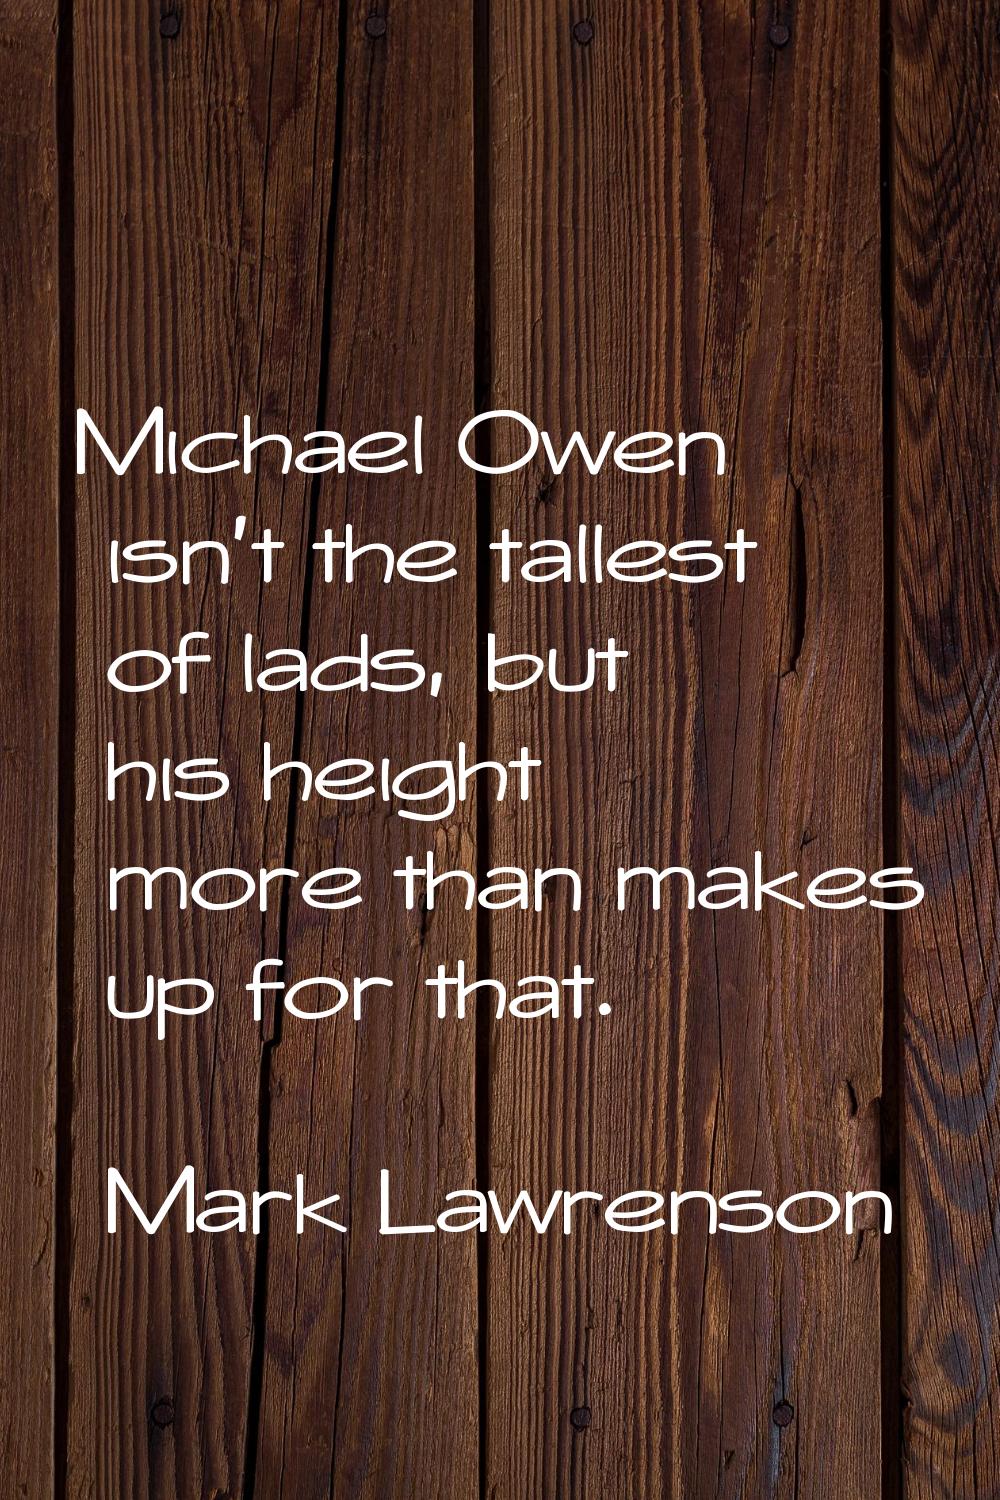 Michael Owen isn't the tallest of lads, but his height more than makes up for that.